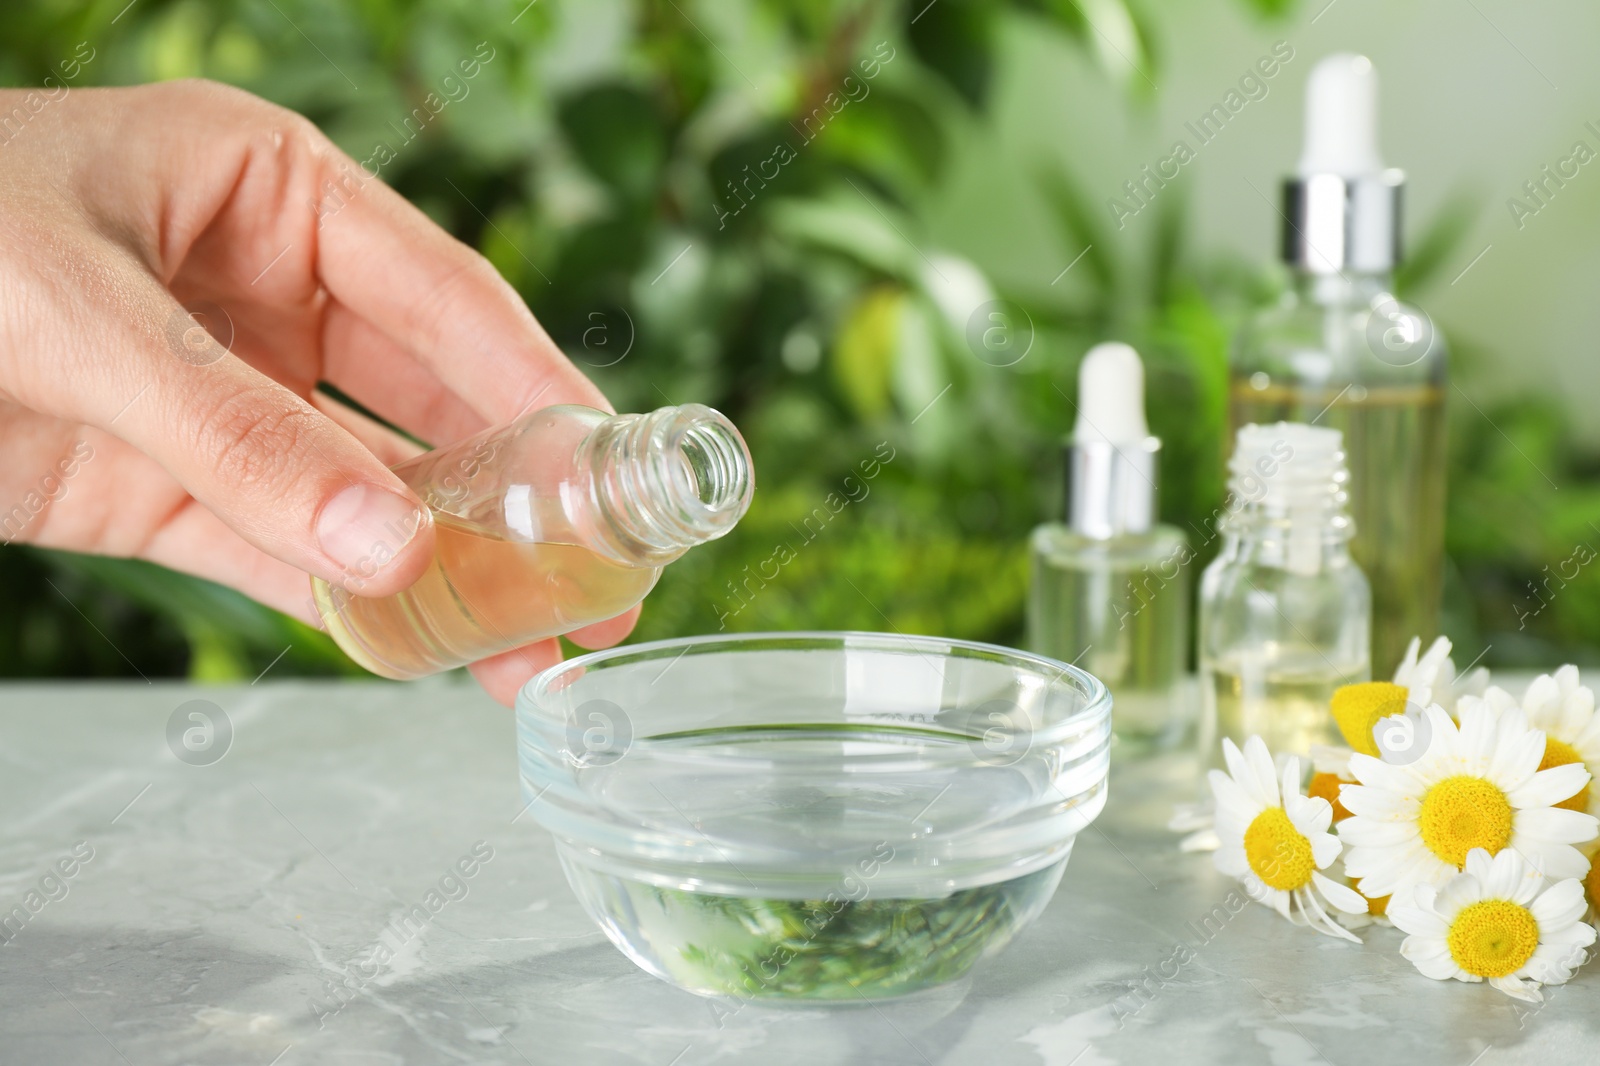 Photo of Woman dripping essential oil into bowl on table, closeup